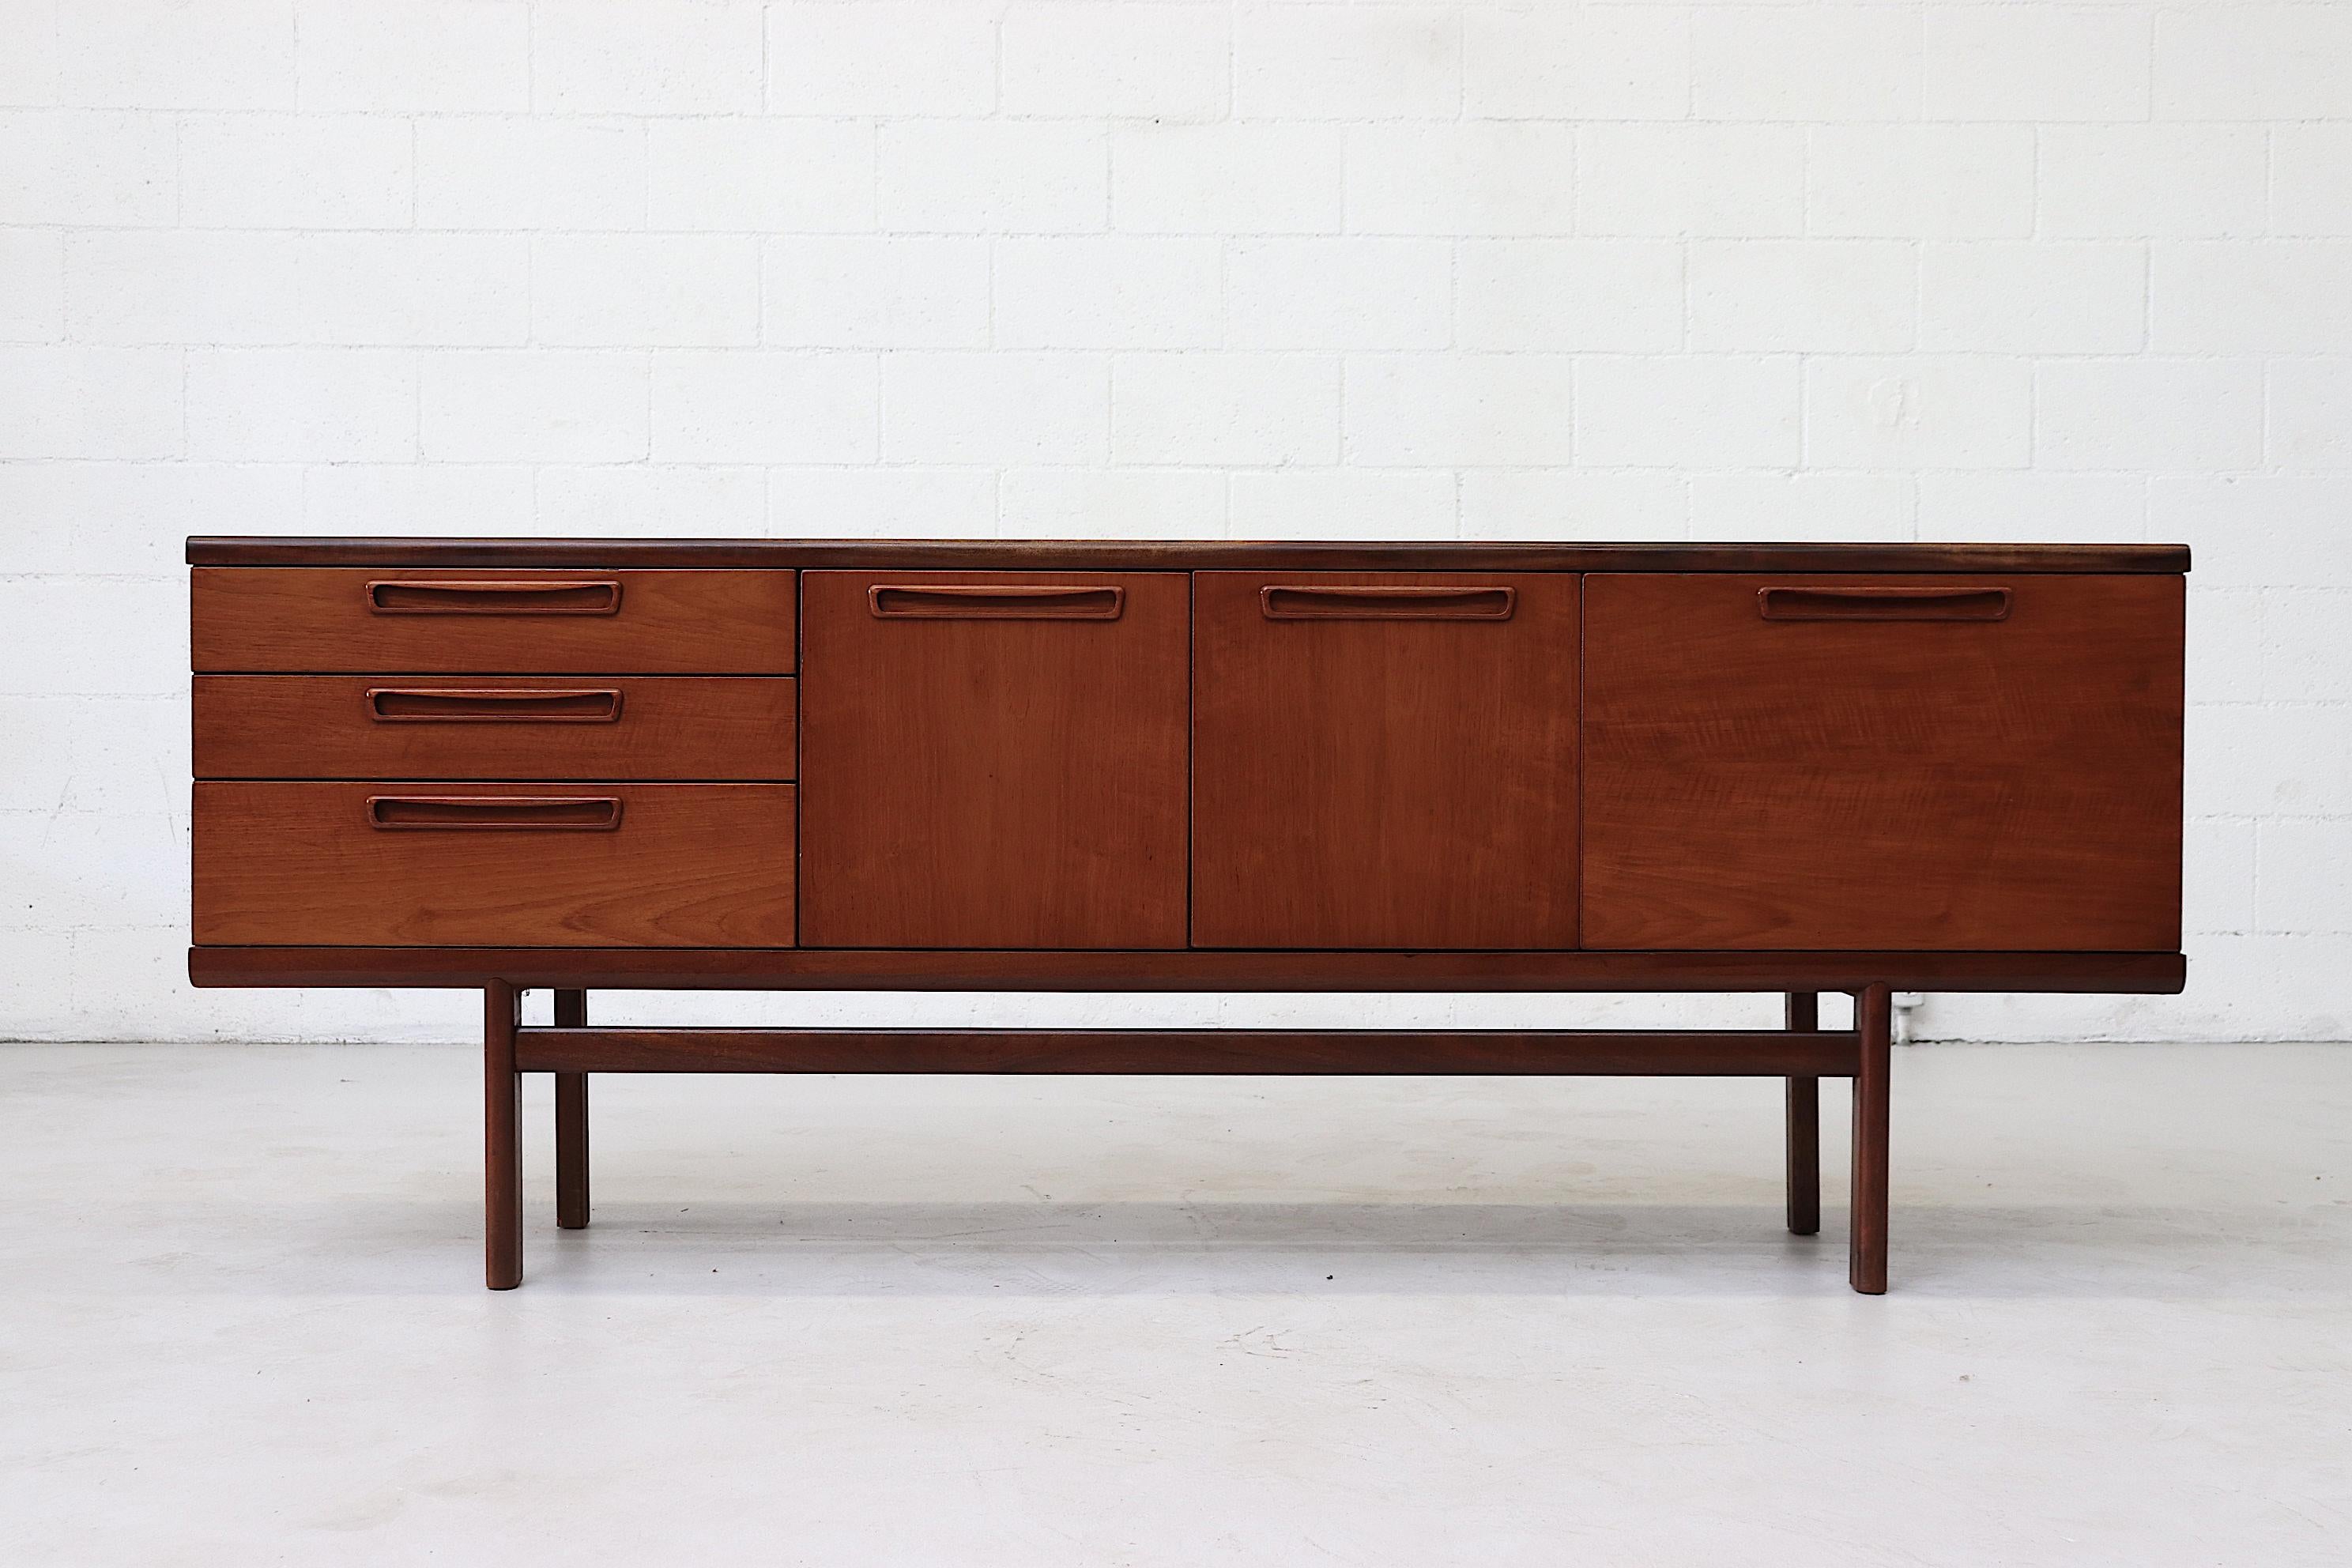 English Midcentury Teak Credenza with Organically Carved Hand Pulls